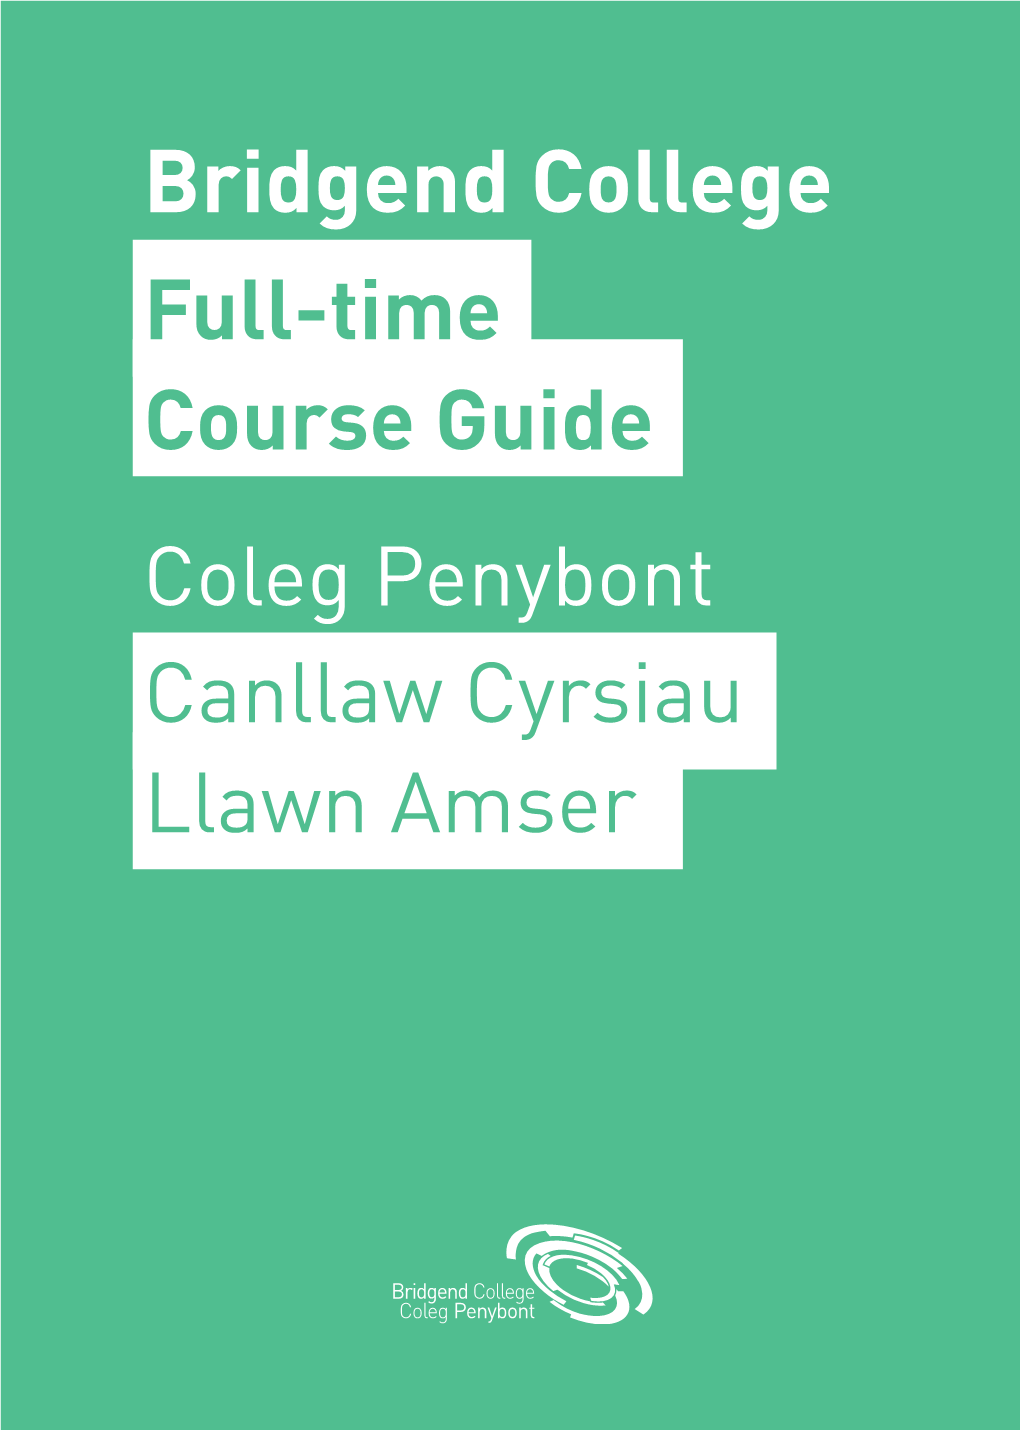 Coleg Penybont Disclaimer Whilst Every Effort Will Be Made to Adhere to the Course Guide, the College Reserves the Right to Amend, Without Notice, the Content Quoted